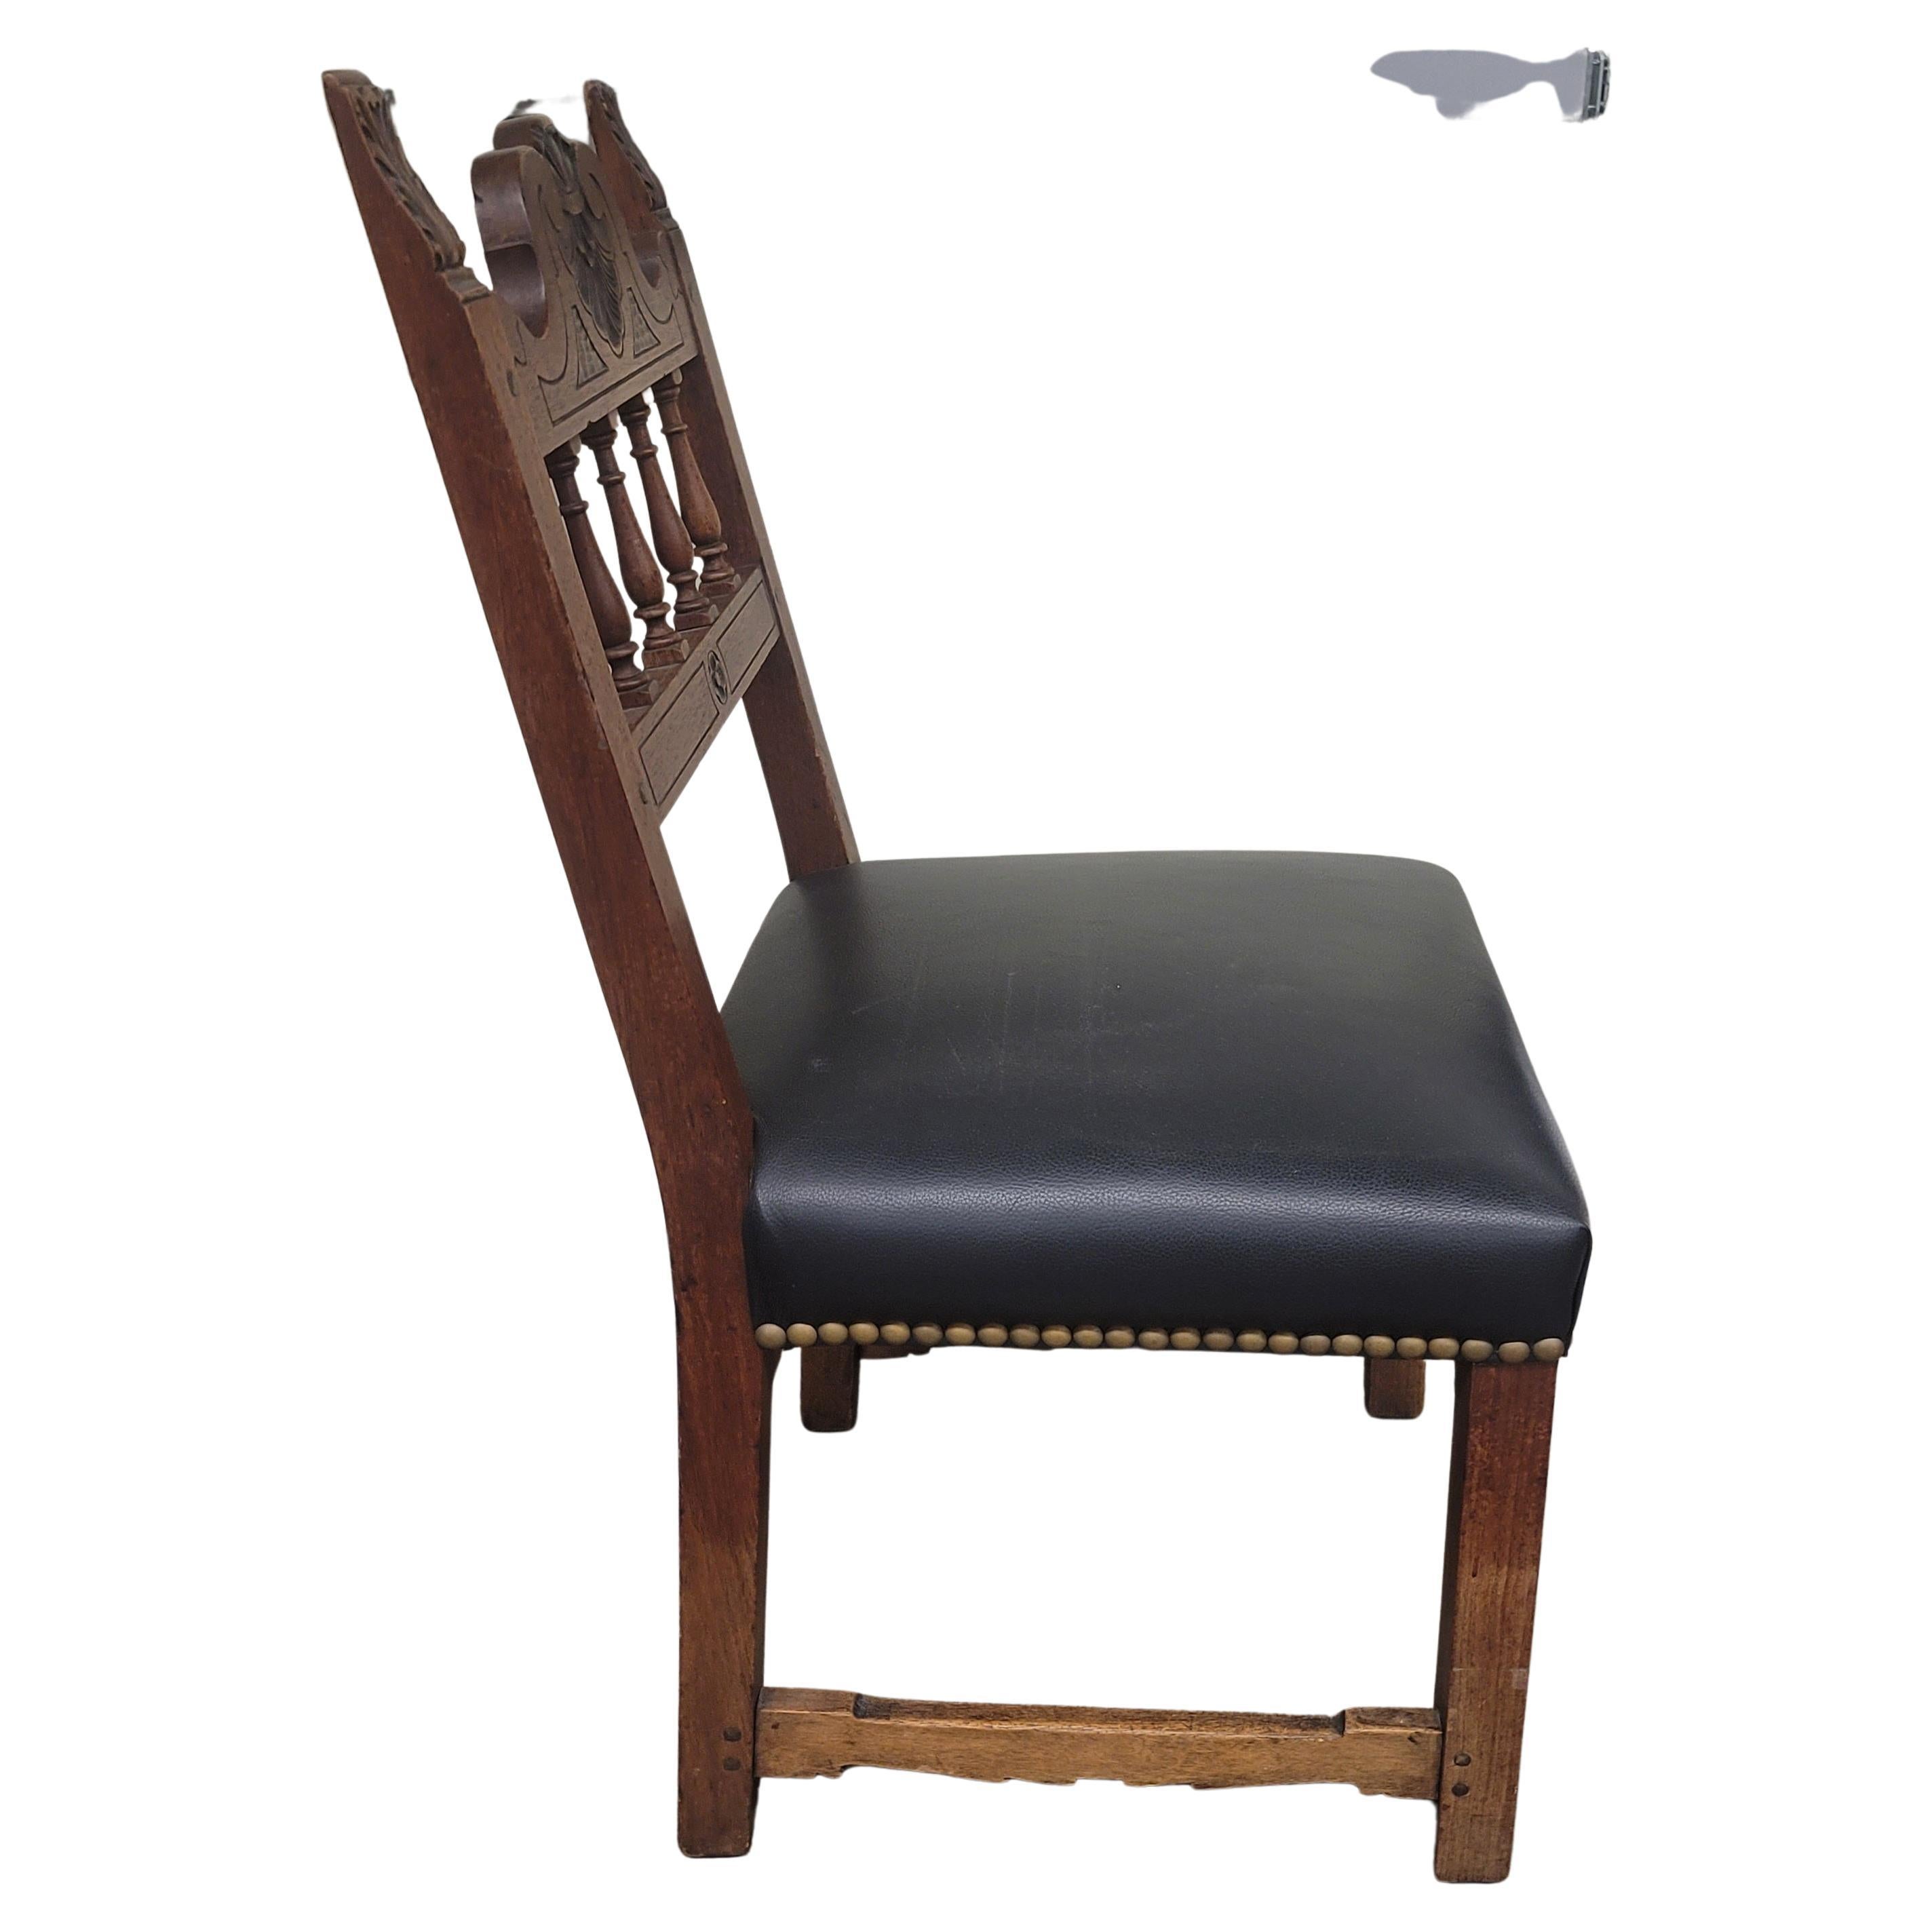 American Baroque Style Carved Wood and Leather Seat Side Chair, Circa 1920s For Sale